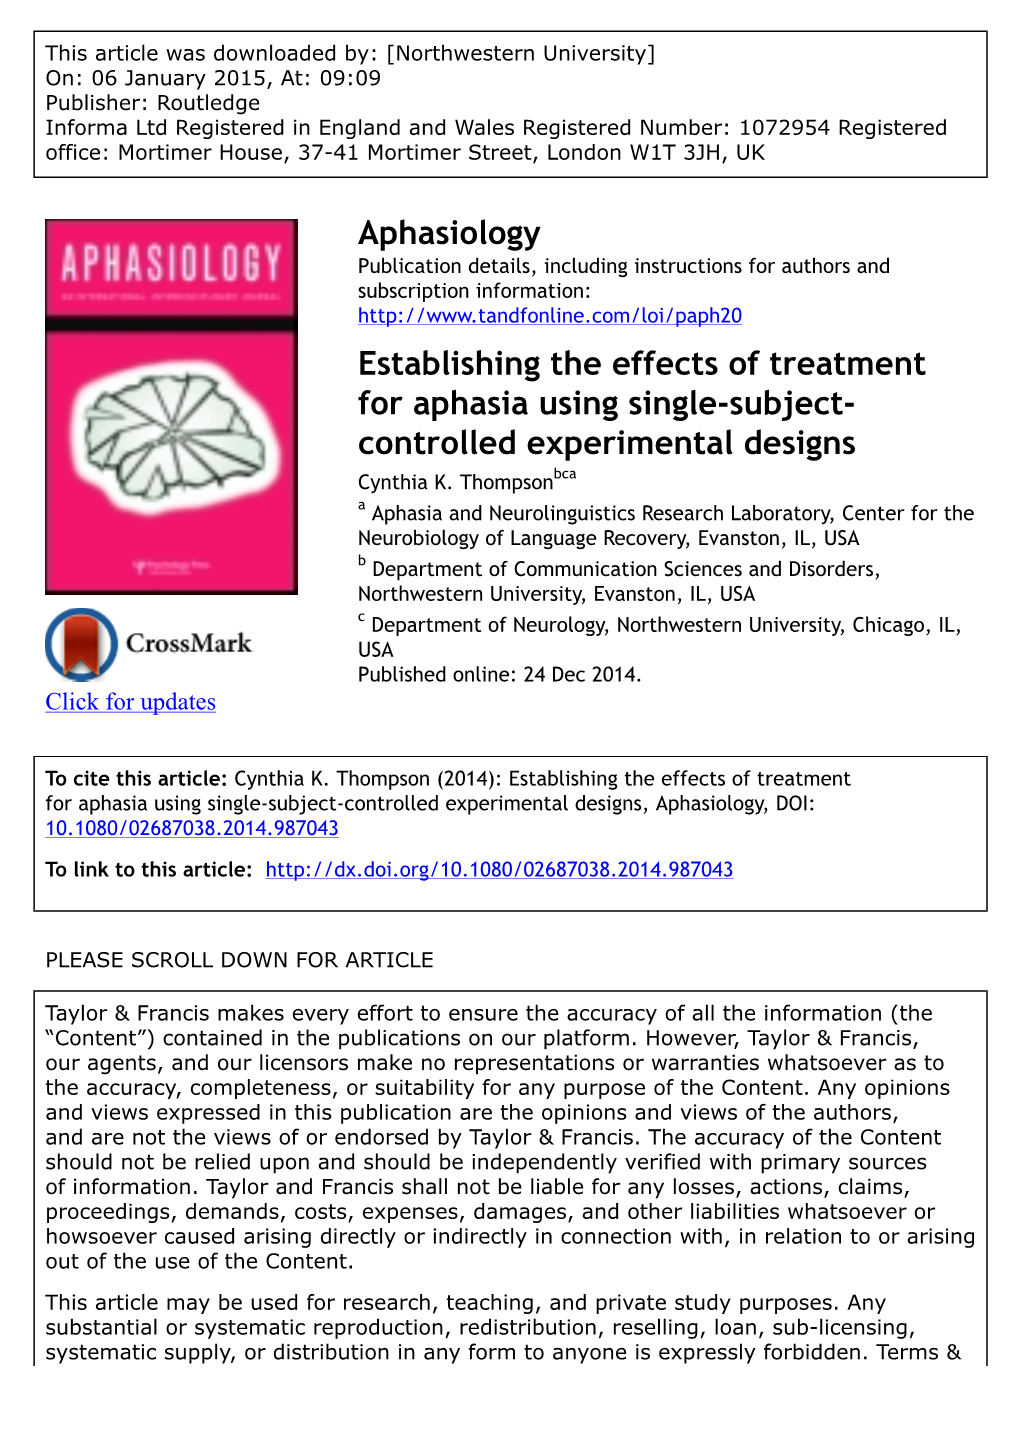 Aphasiology Establishing the Effects of Treatment for Aphasia Using Single